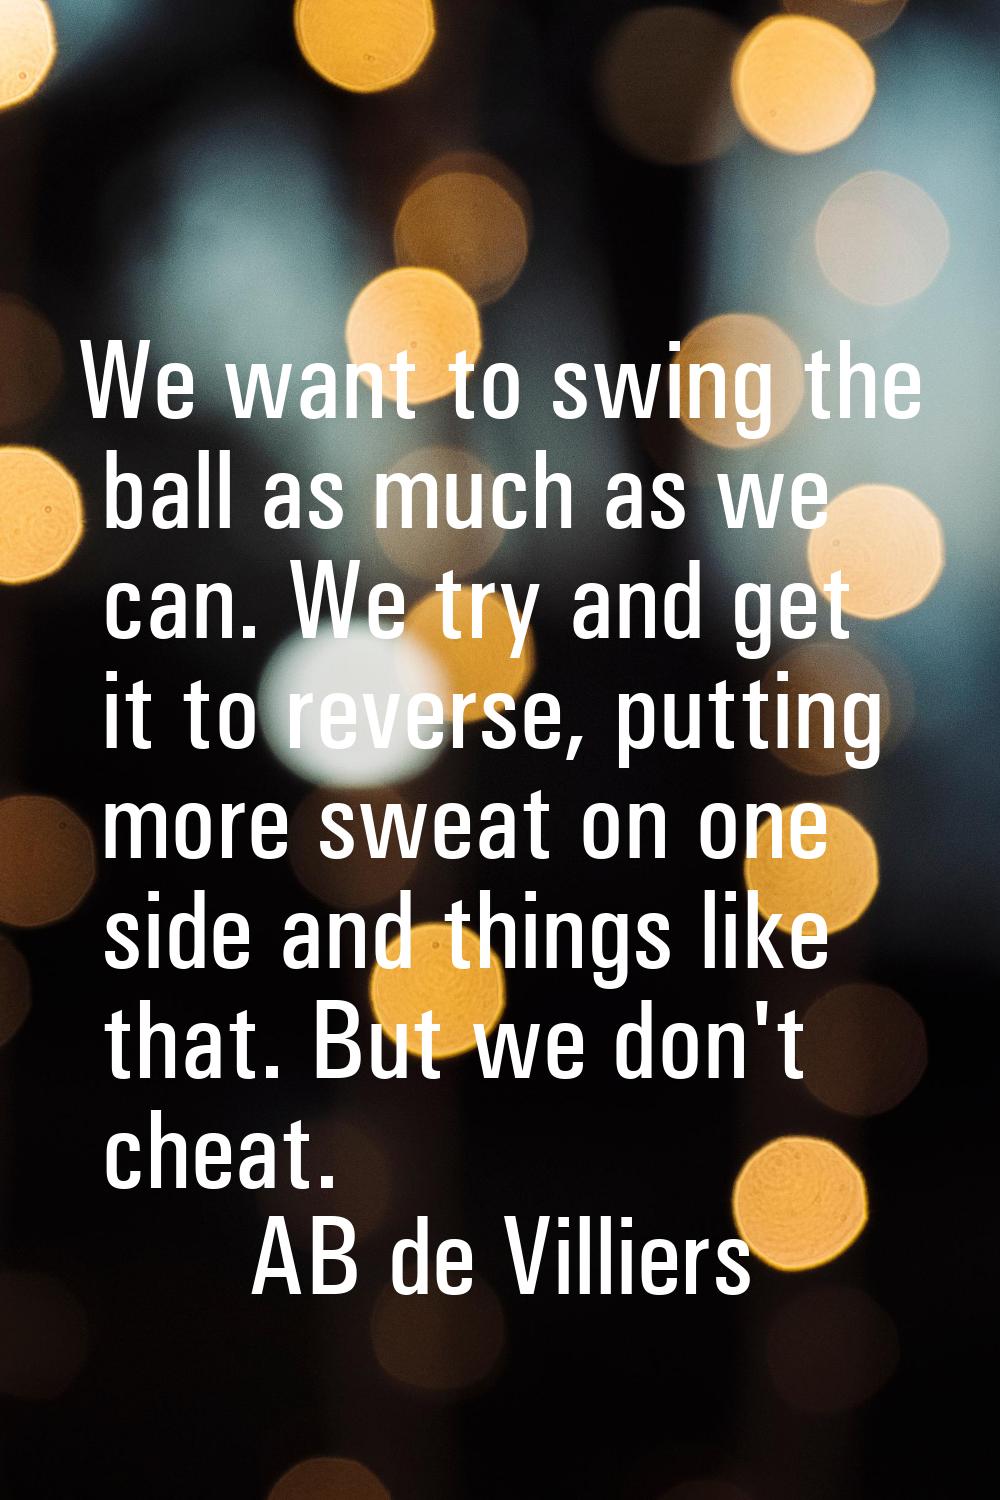 We want to swing the ball as much as we can. We try and get it to reverse, putting more sweat on on